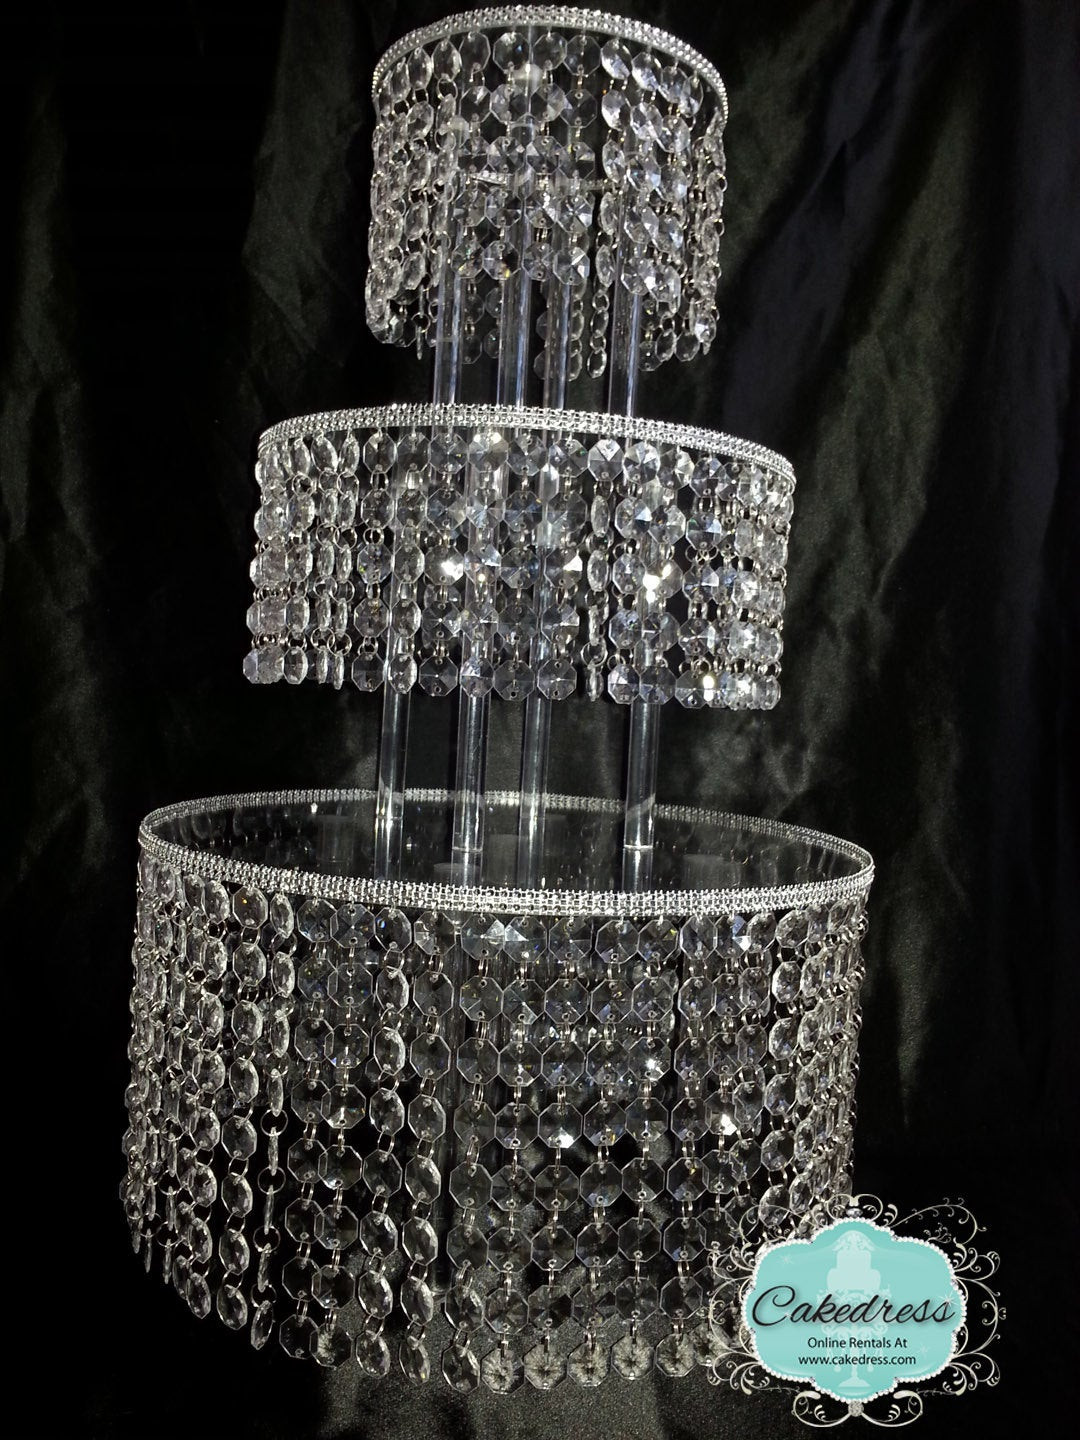 Crystal Wedding Cakes
 Crystal Wedding Cake Stand 5 Tier by CakeDress on Etsy